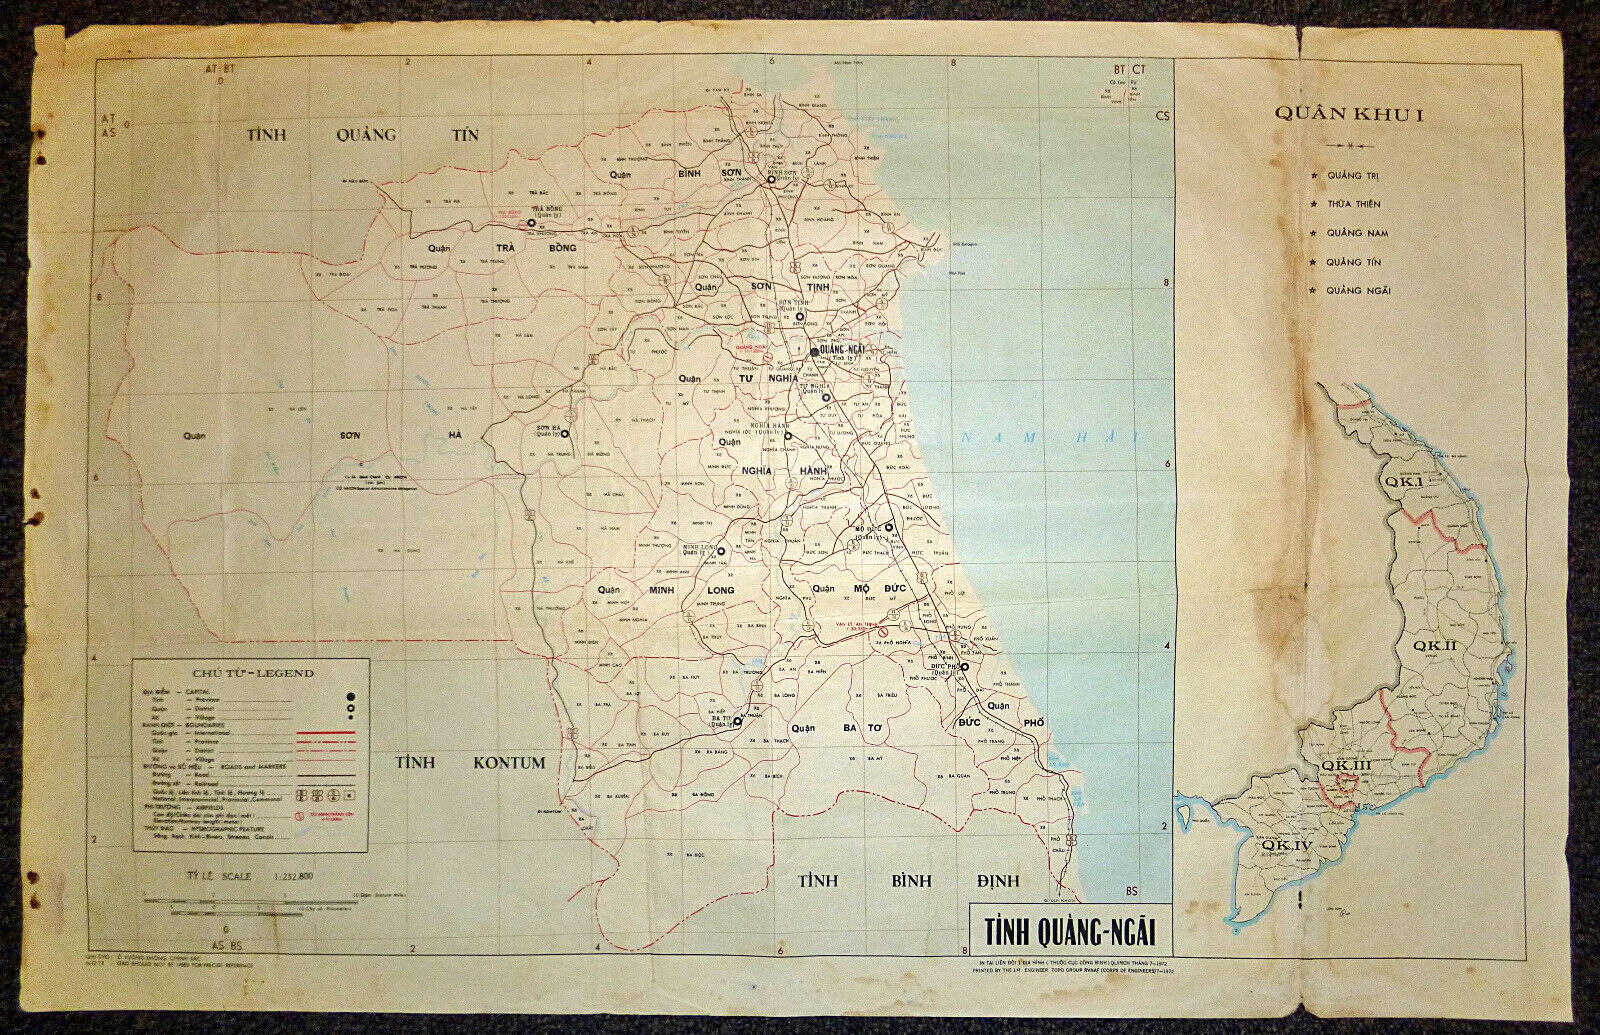 Extremely Rare 1972 Map - QUANG NGAI - MY SON (My Lai) - CTZ ZONES - VIETNAM WAR